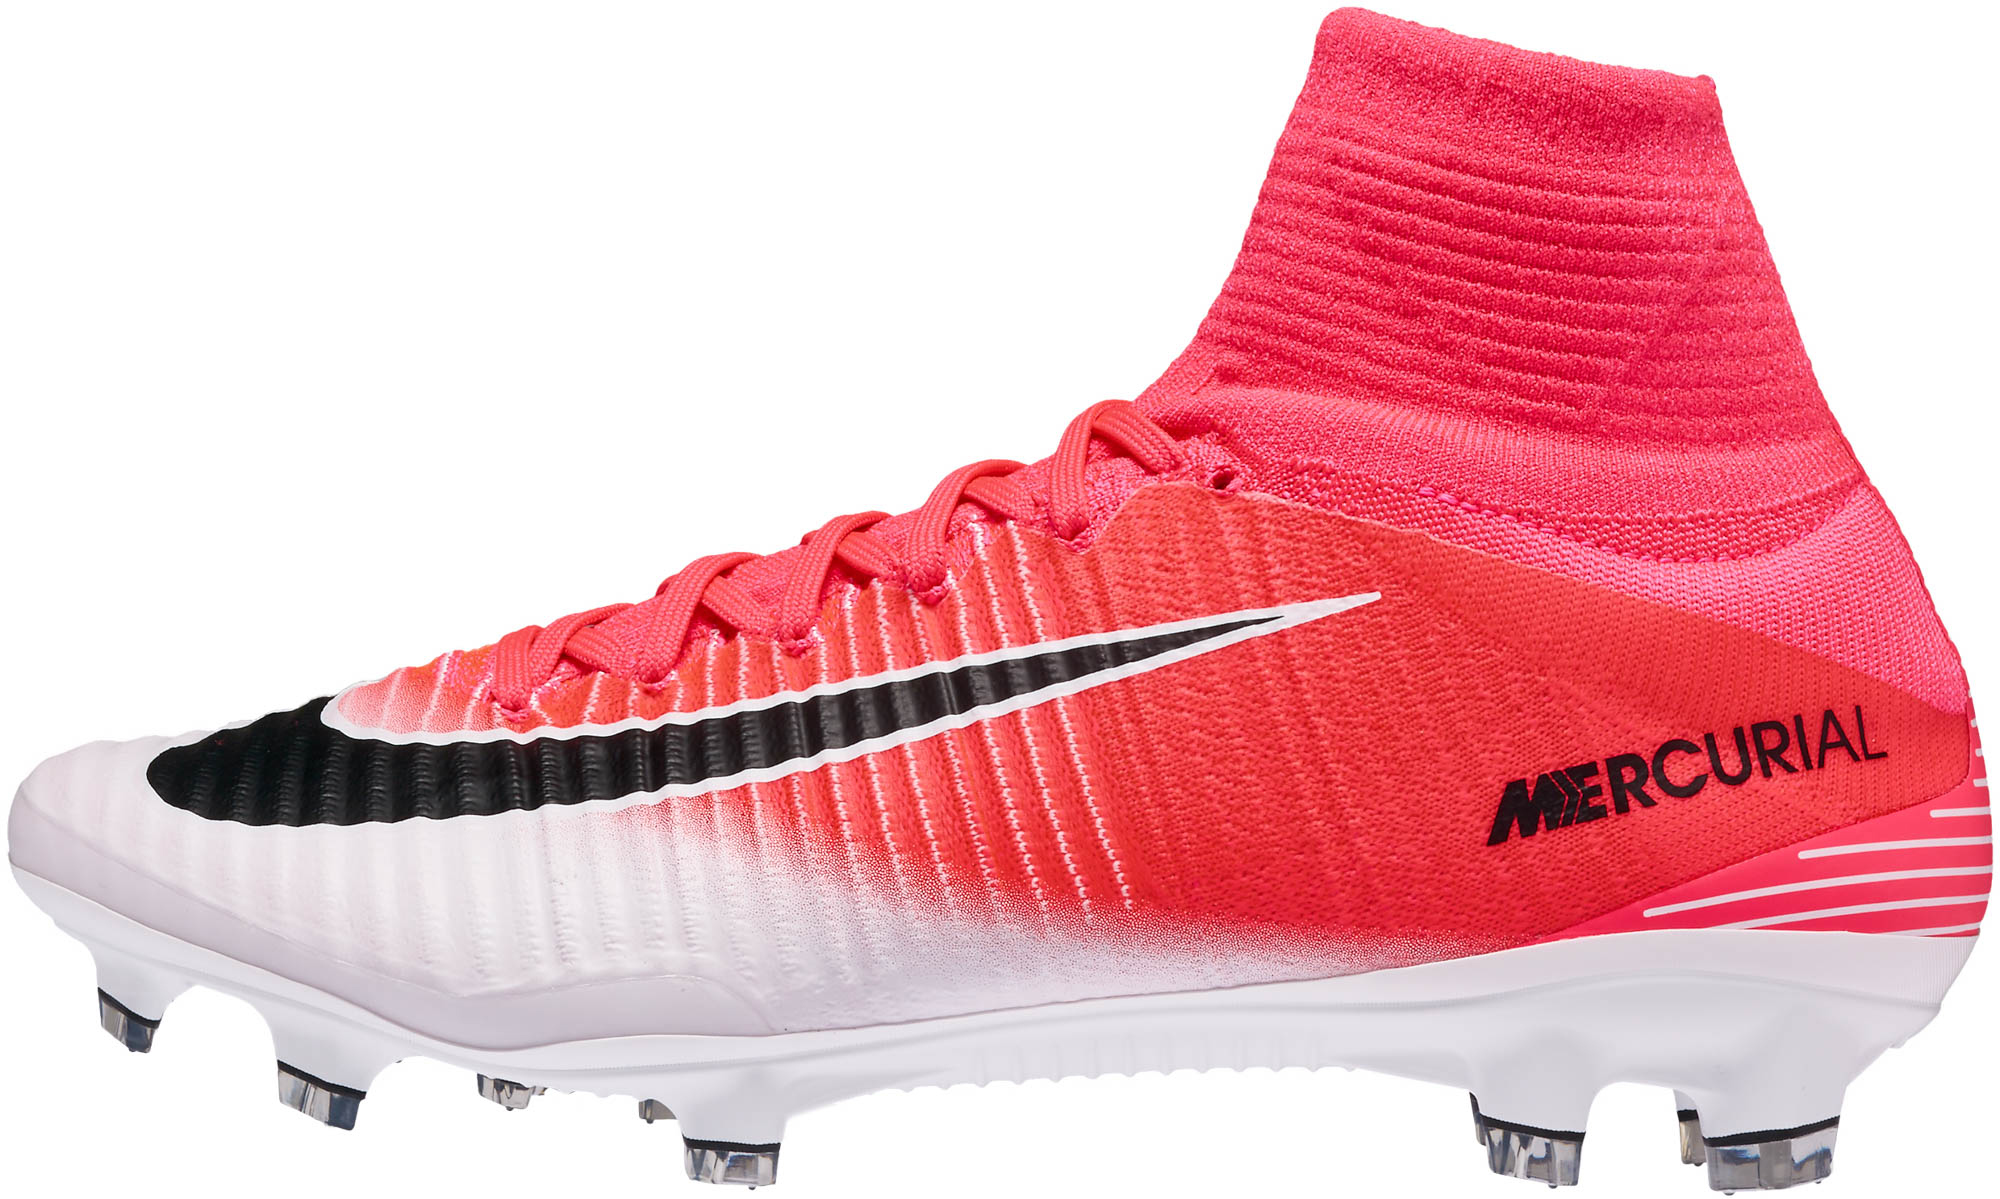 nike mercurial superfly iv fg soccer cleats - pink and black